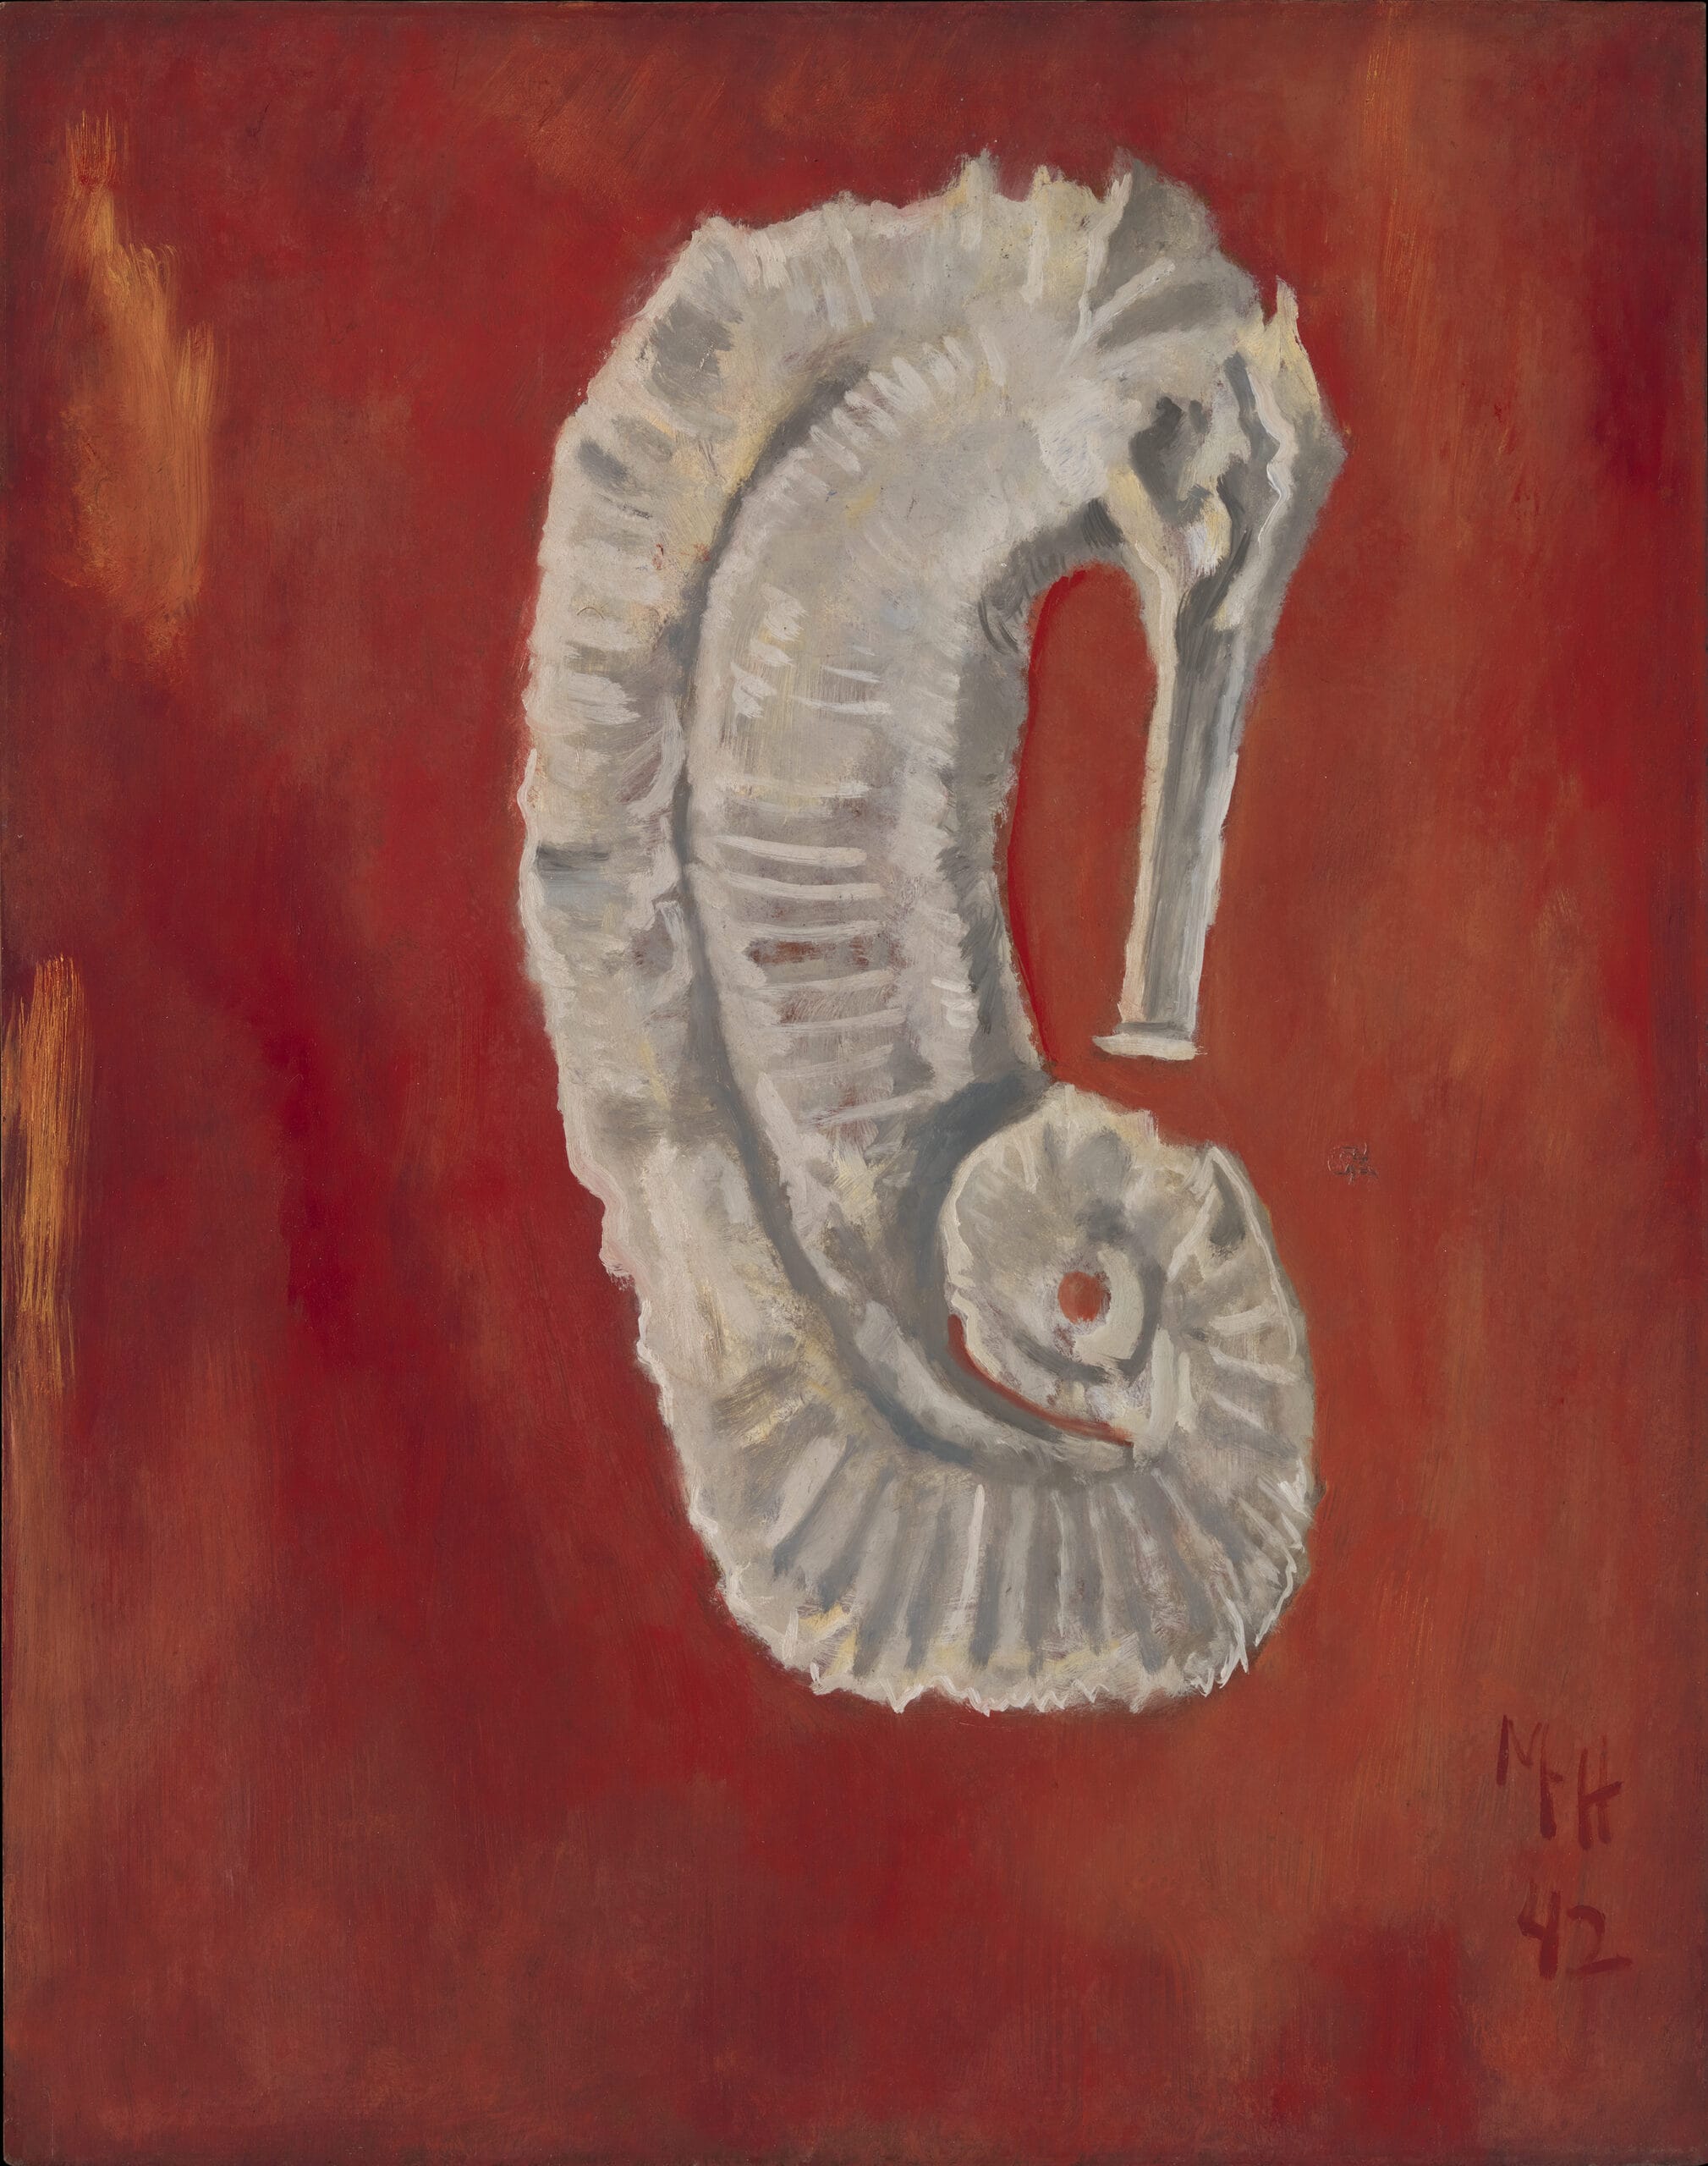 A white sea horse centered on a red background.